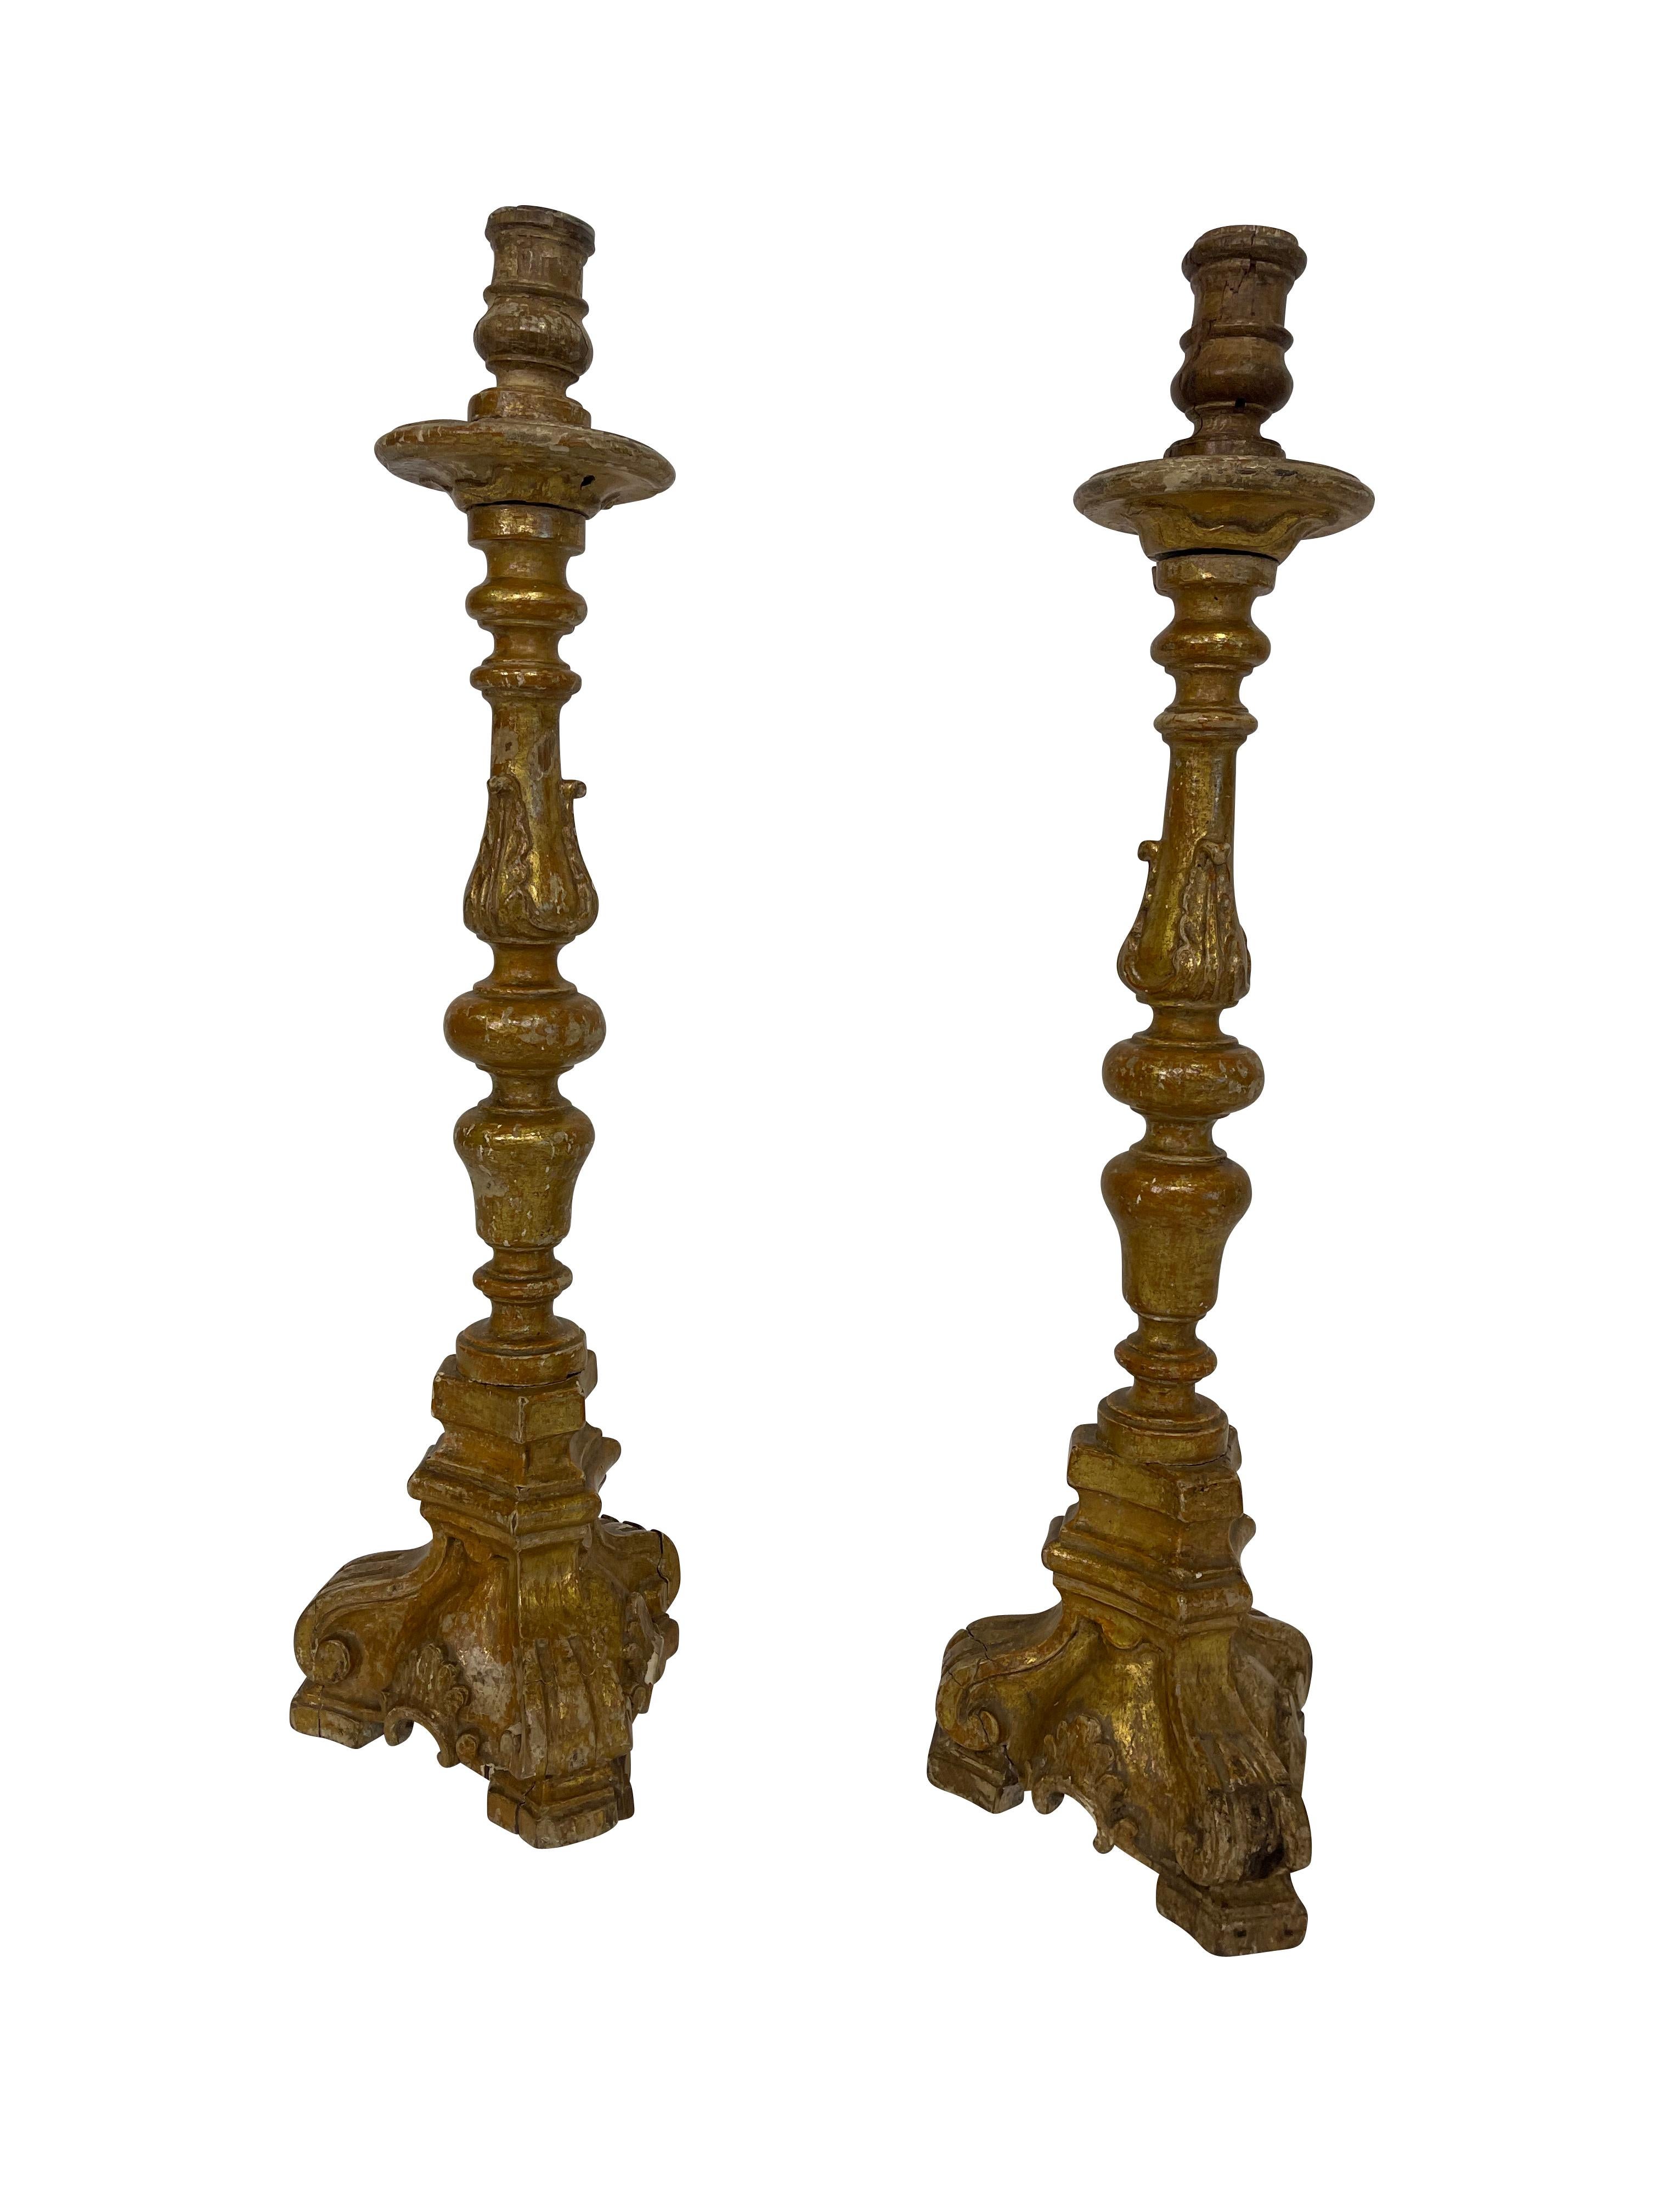 Hand-Painted 19th Century Antique Italian Baroque Gilt Candlesticks / Candelabra For Sale